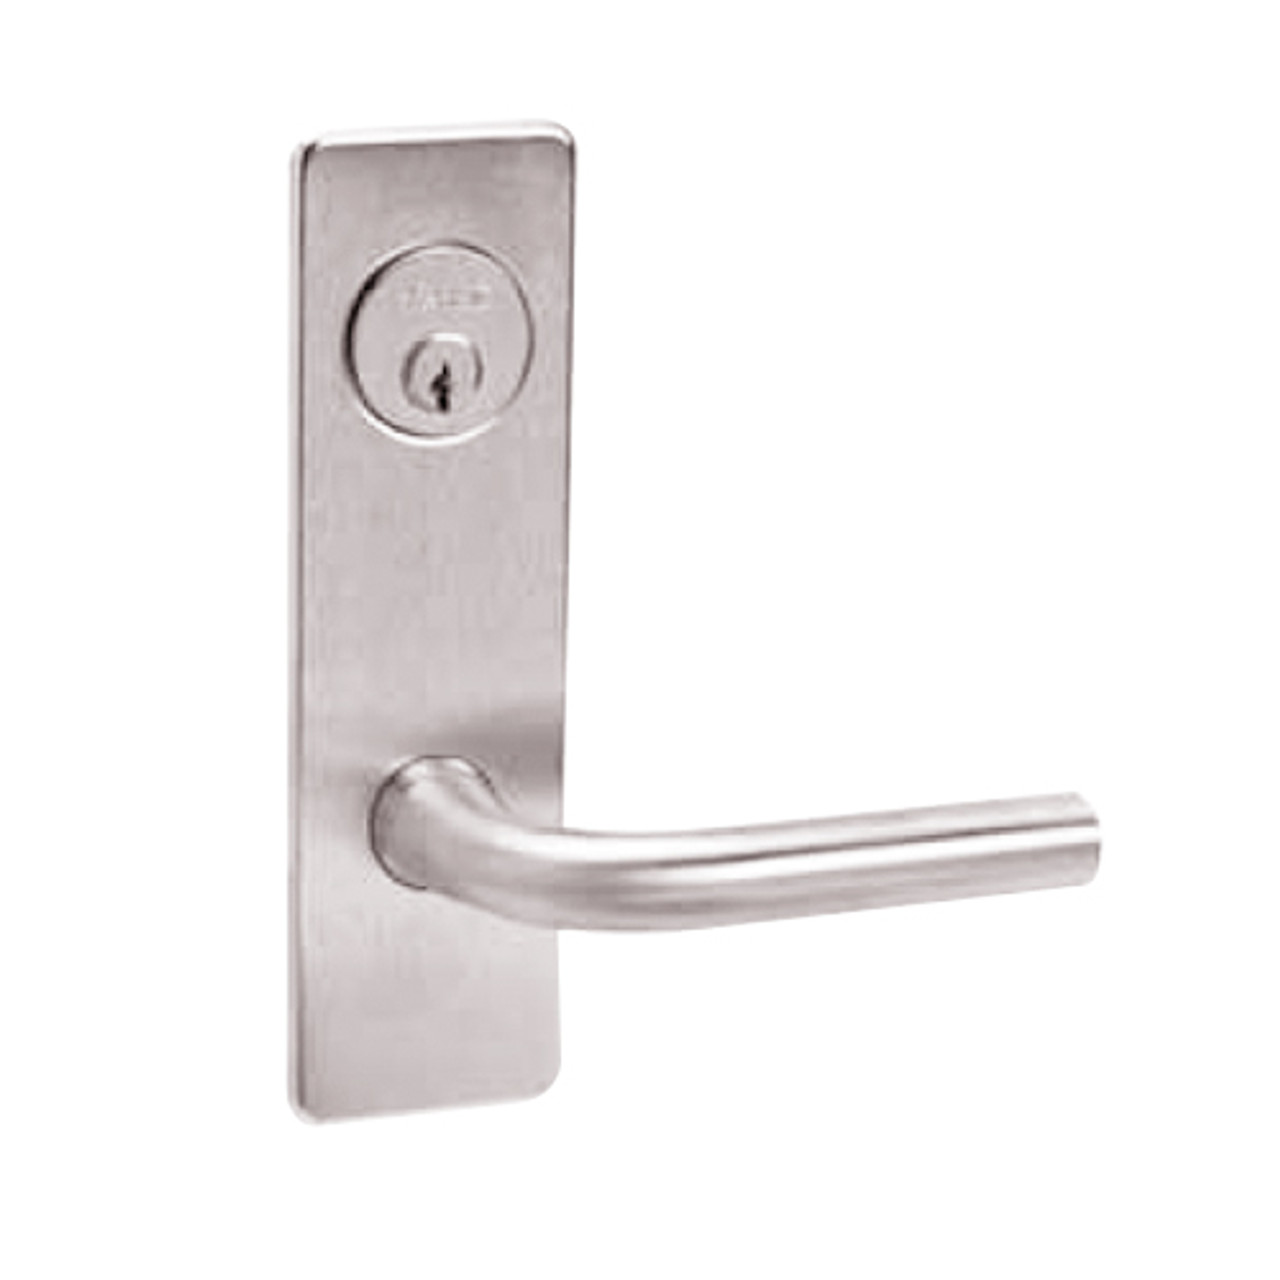 ML2065-RSM-629 Corbin Russwin ML2000 Series Mortise Dormitory Locksets with Regis Lever and Deadbolt in Bright Stainless Steel